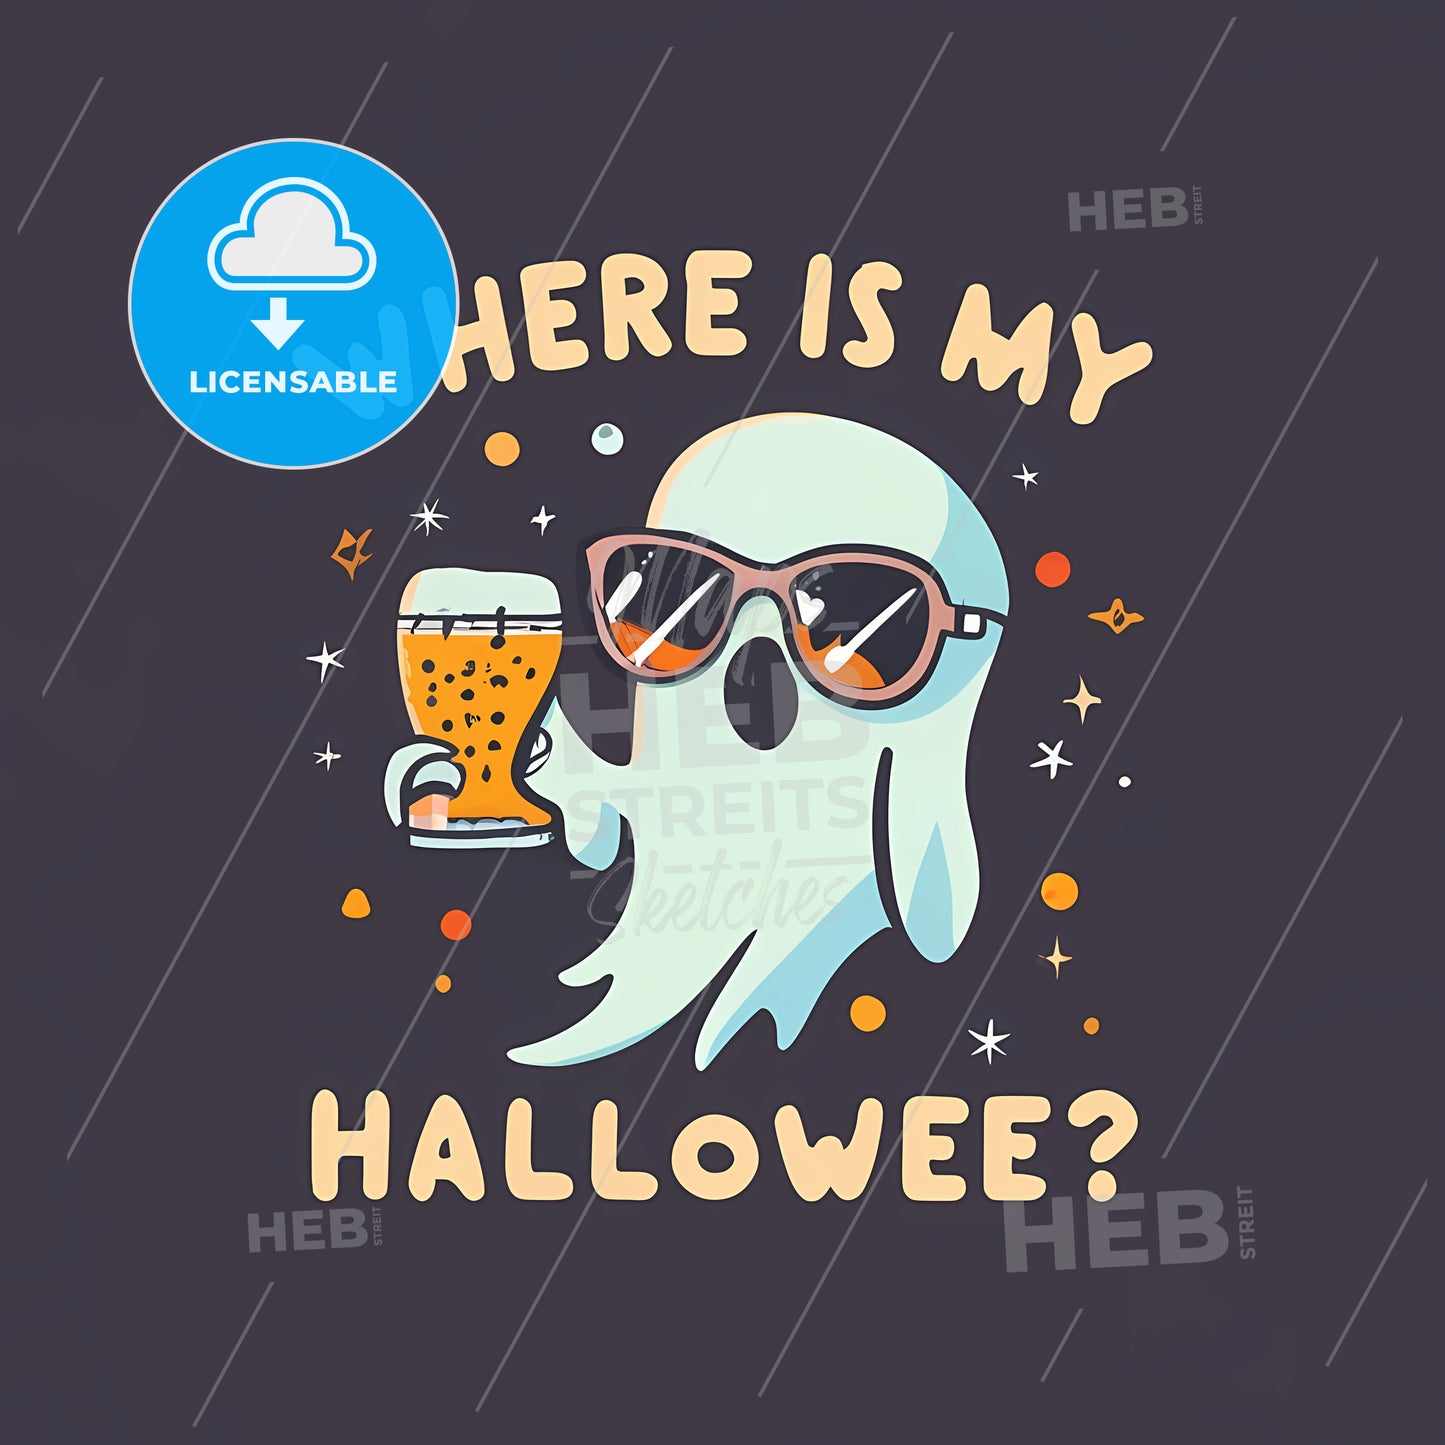 Where Is My Hallowee? - A Cartoon Ghost Holding A Glass Of Beer